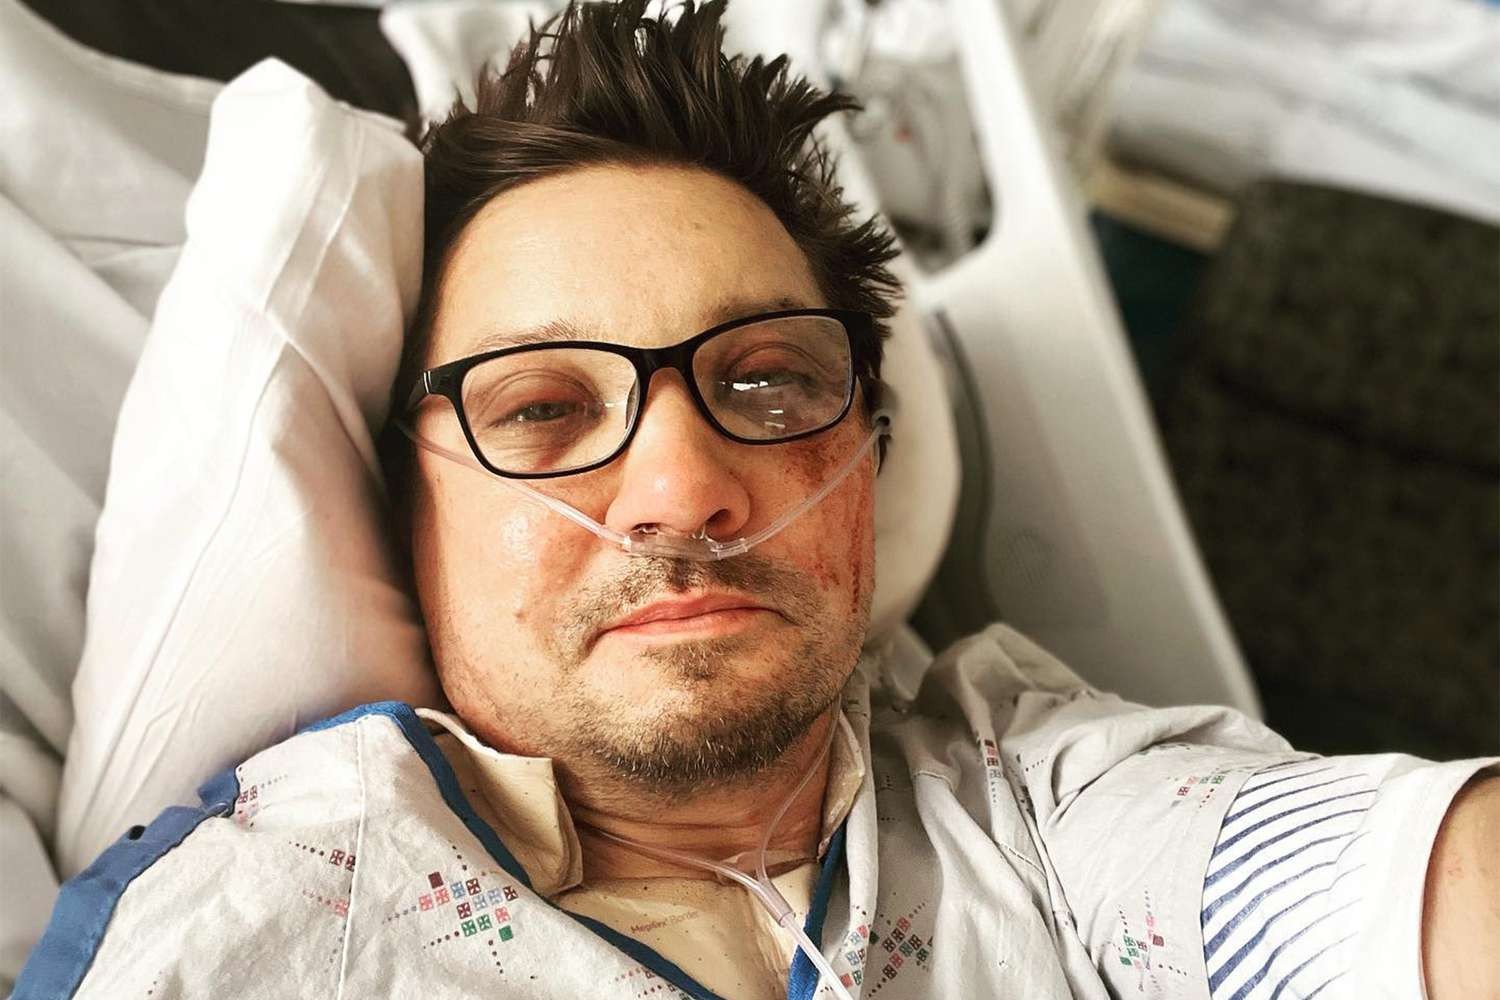 Jeremy Renner in the hospital bed after his accident.